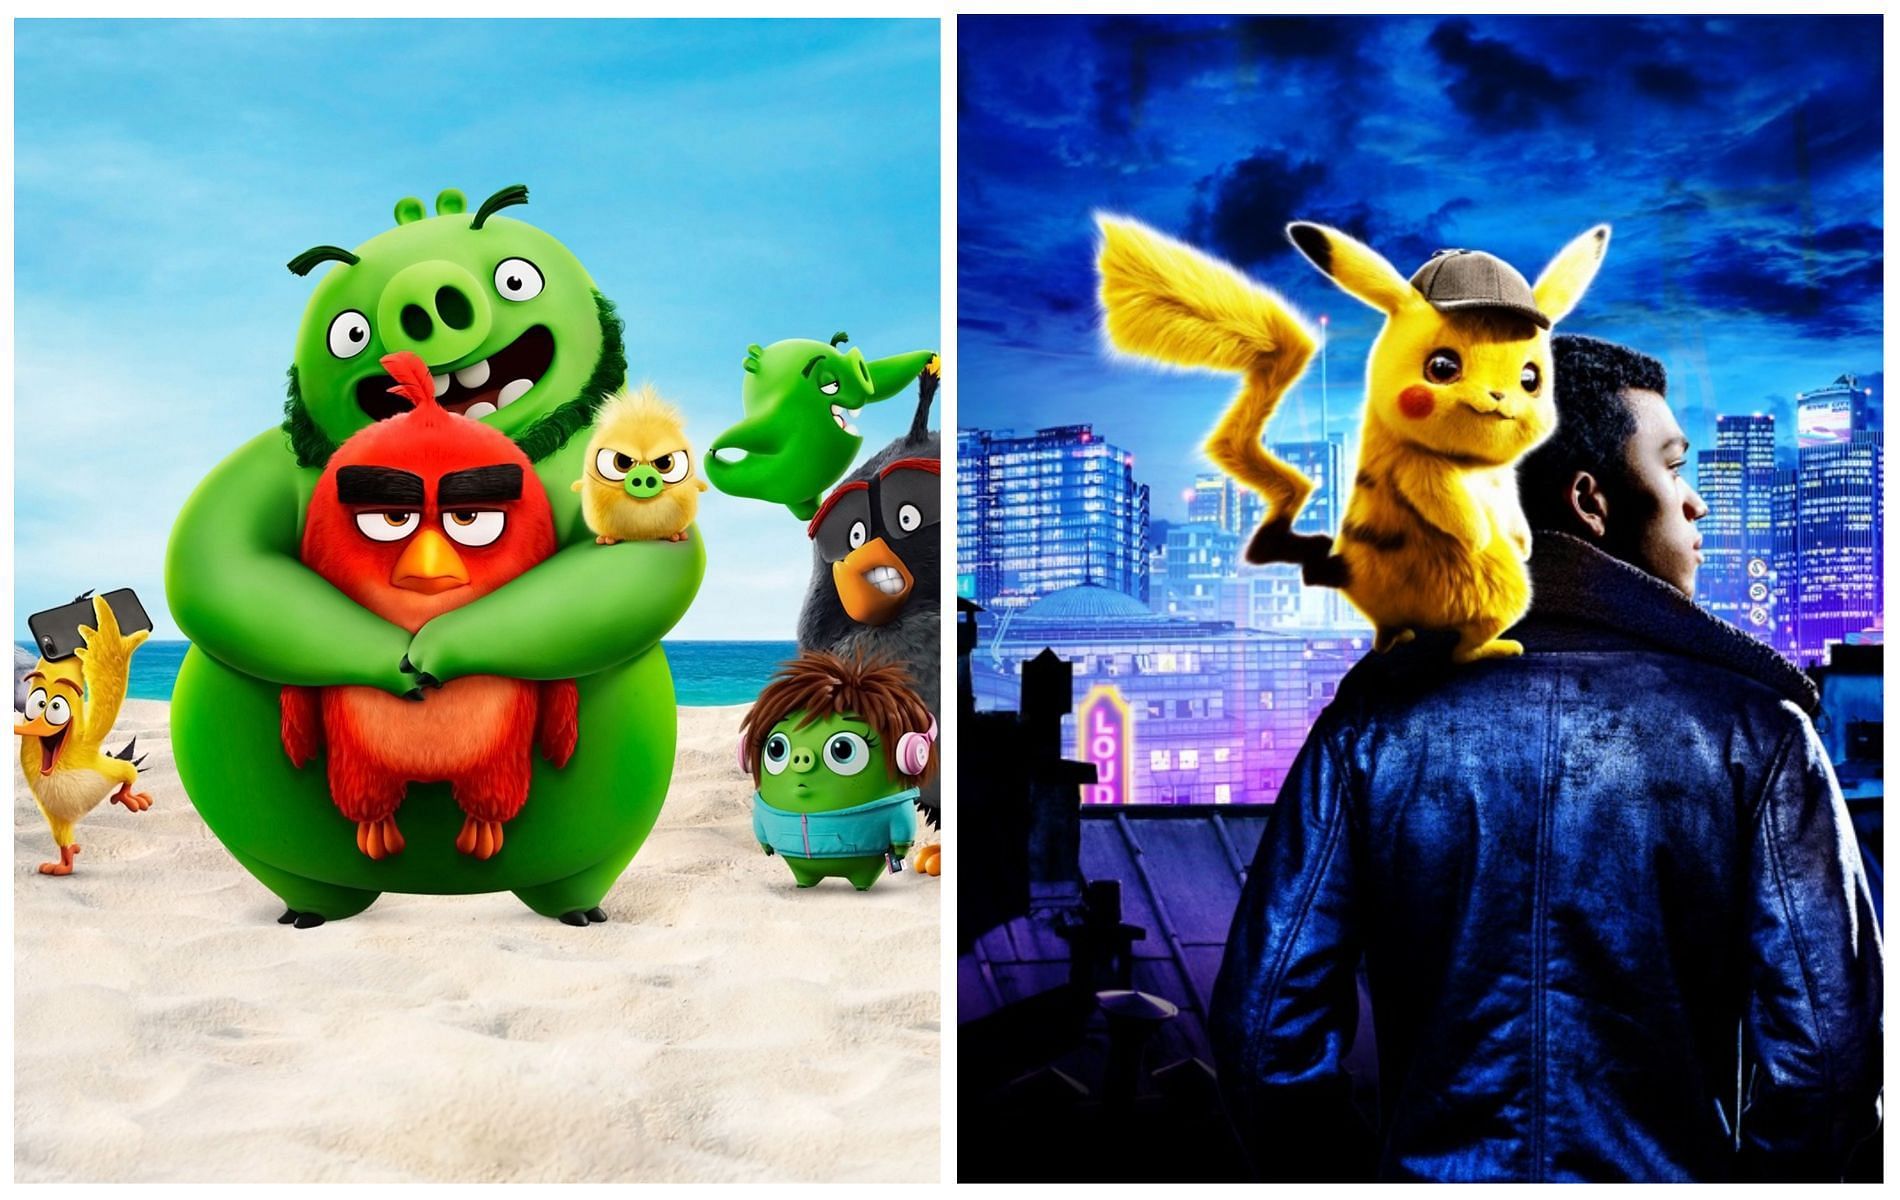 Movies based on video games have always been either hit or miss (Images via Sony Pictures, Legendary Pictures)